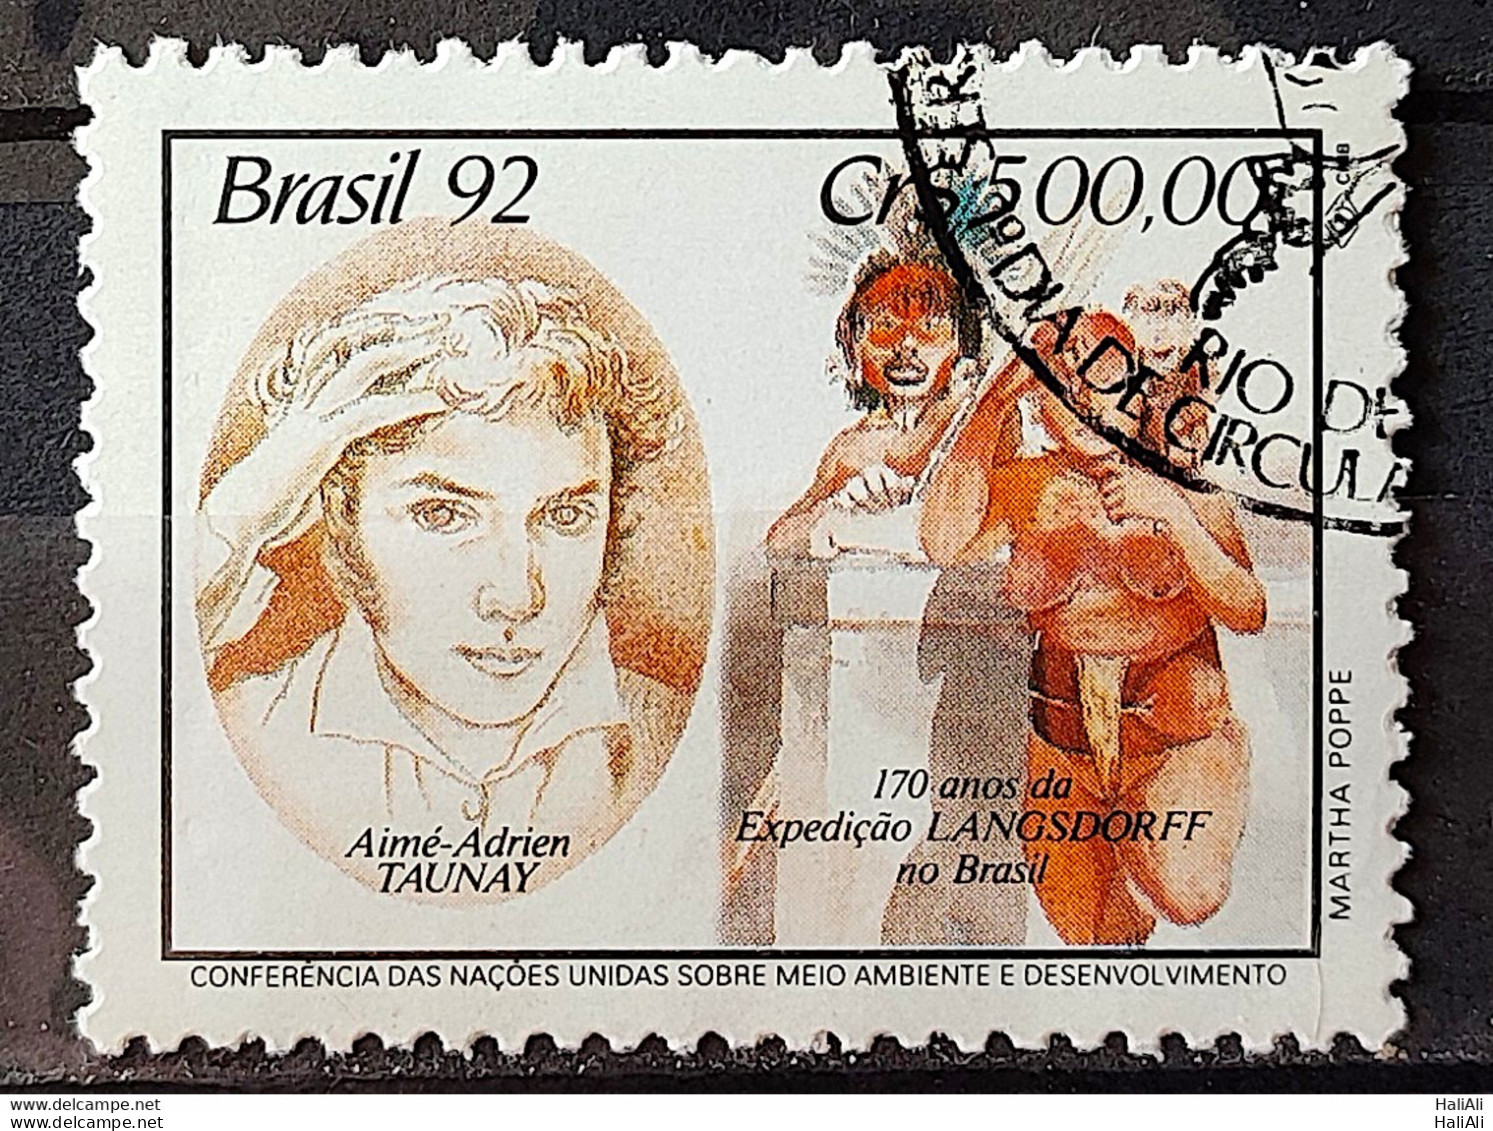 C 1795 Brazil Stamp Expedition Longsdorff Environment Taunay Indio 1992 Circulated 5 - Used Stamps